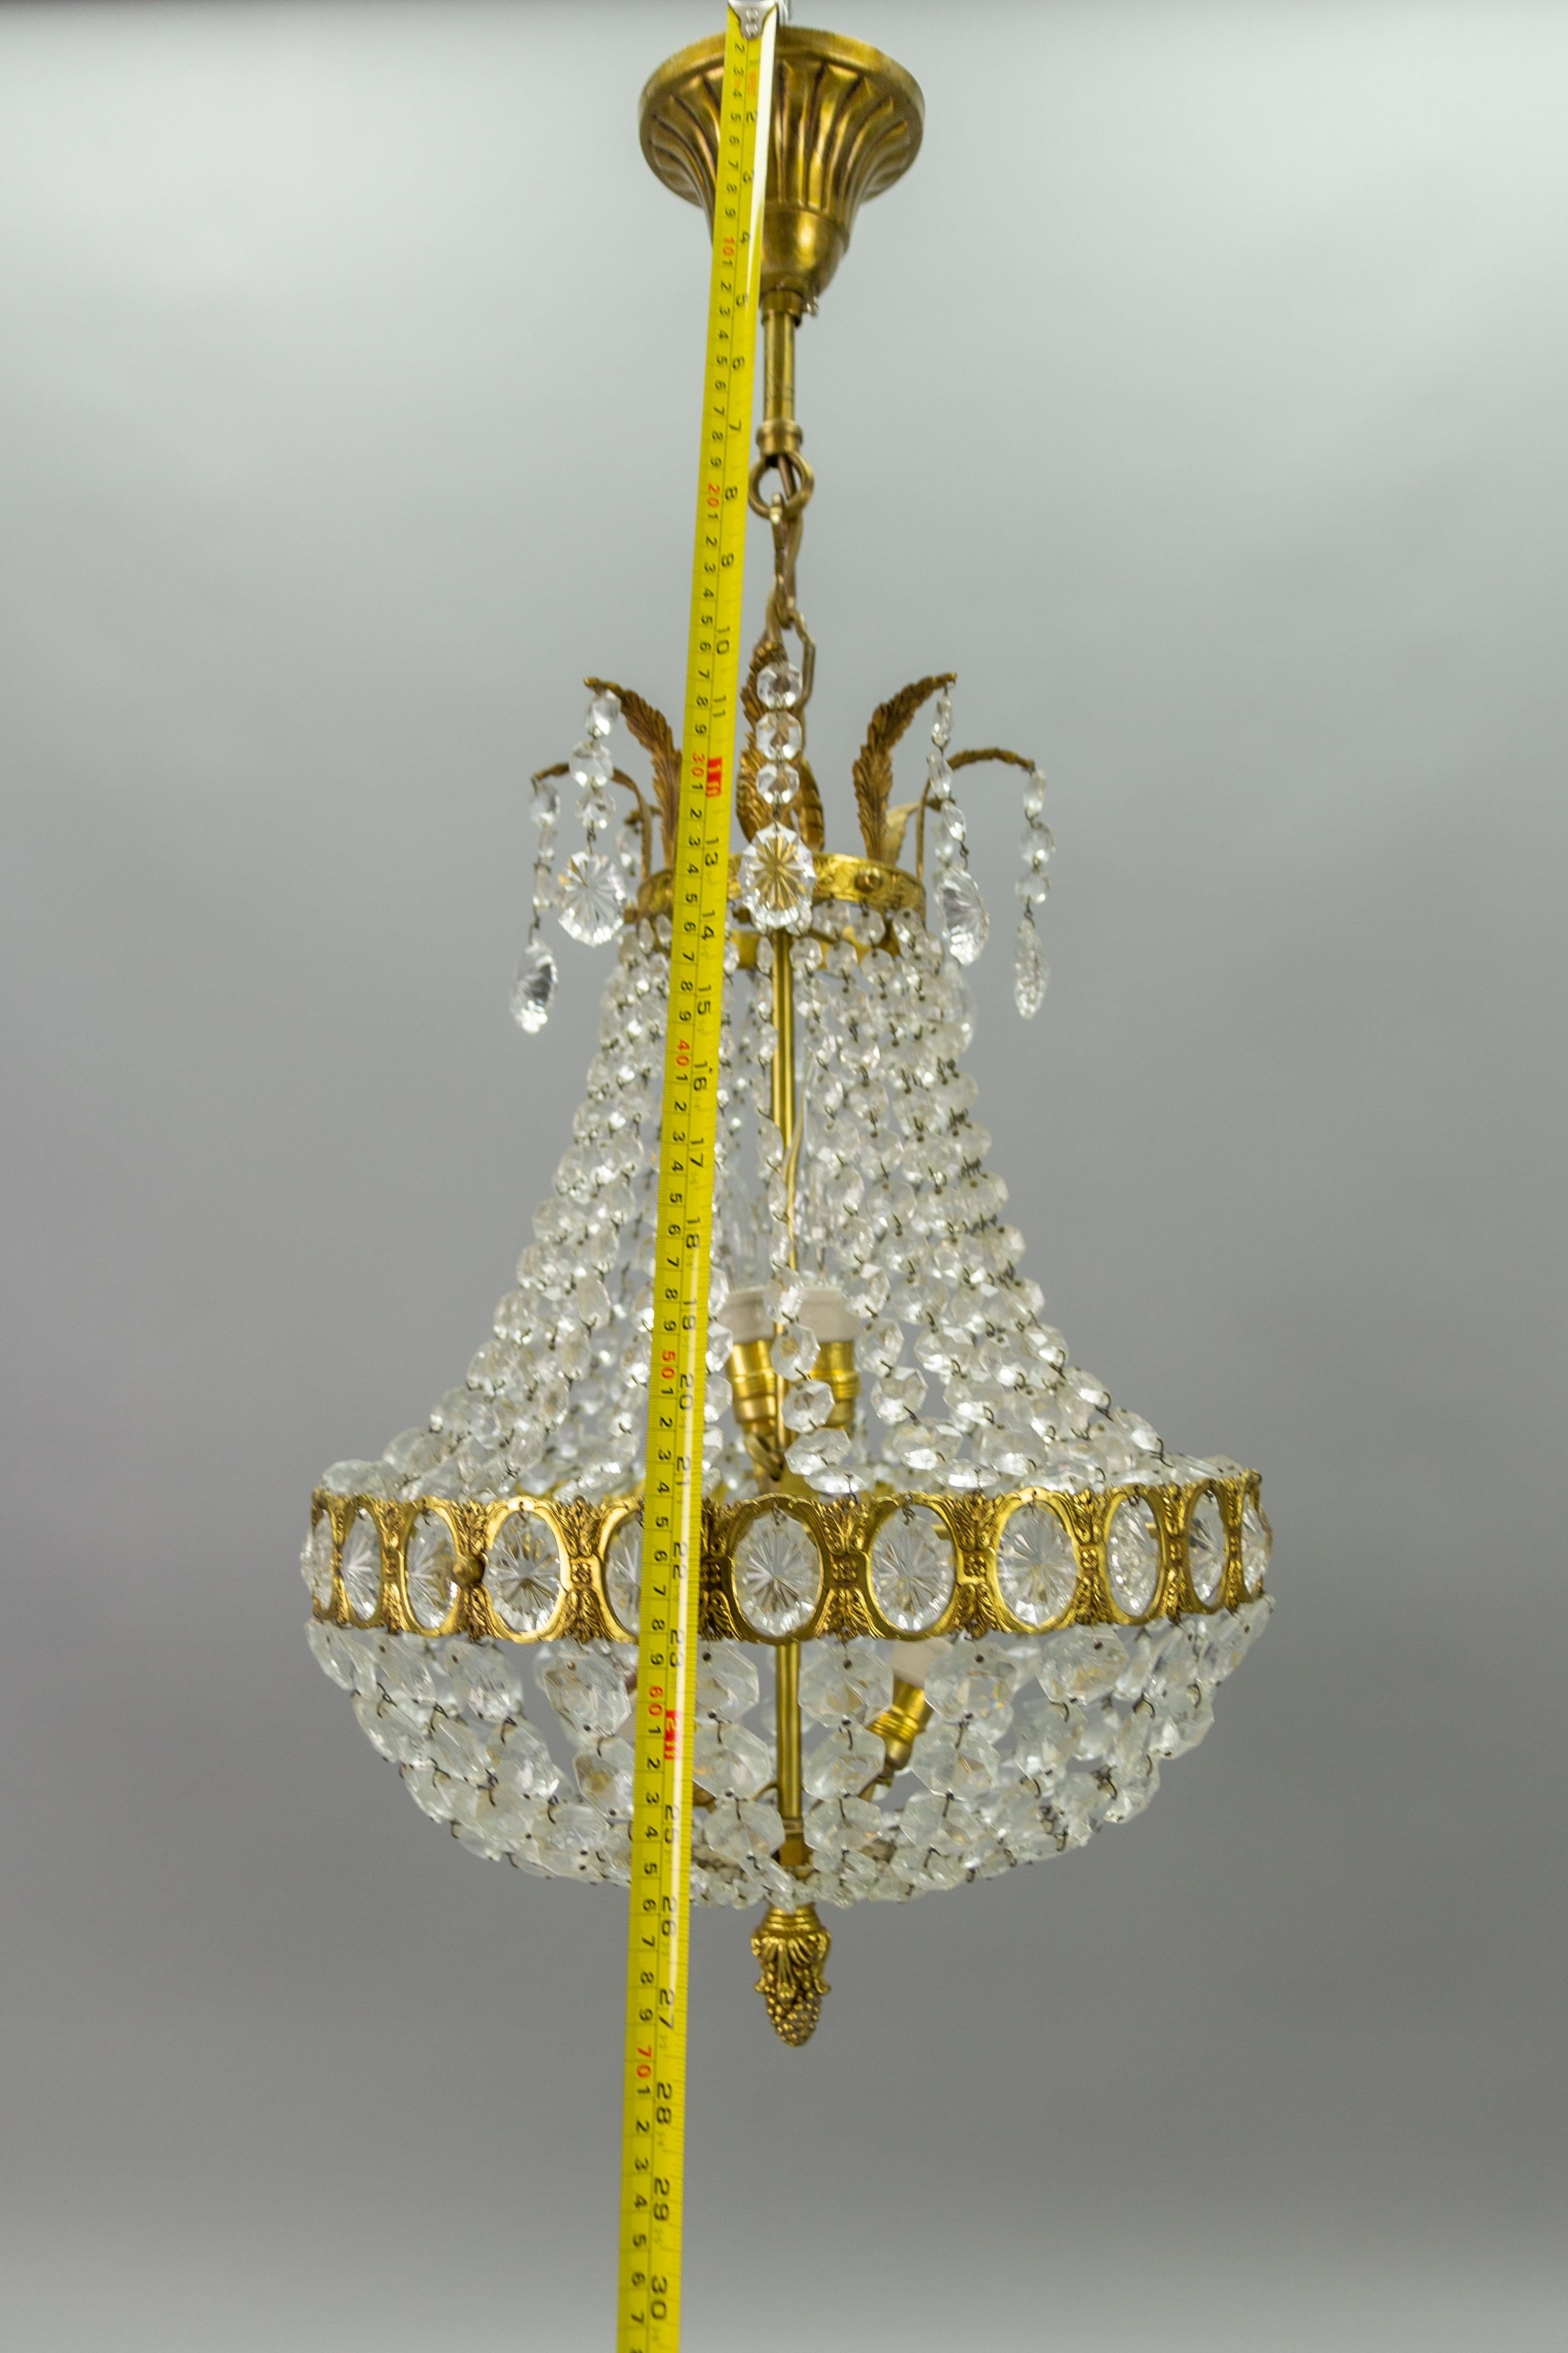 French Empire Style Crystal Glass and Four-Light Basket-Shaped Chandelier For Sale 14